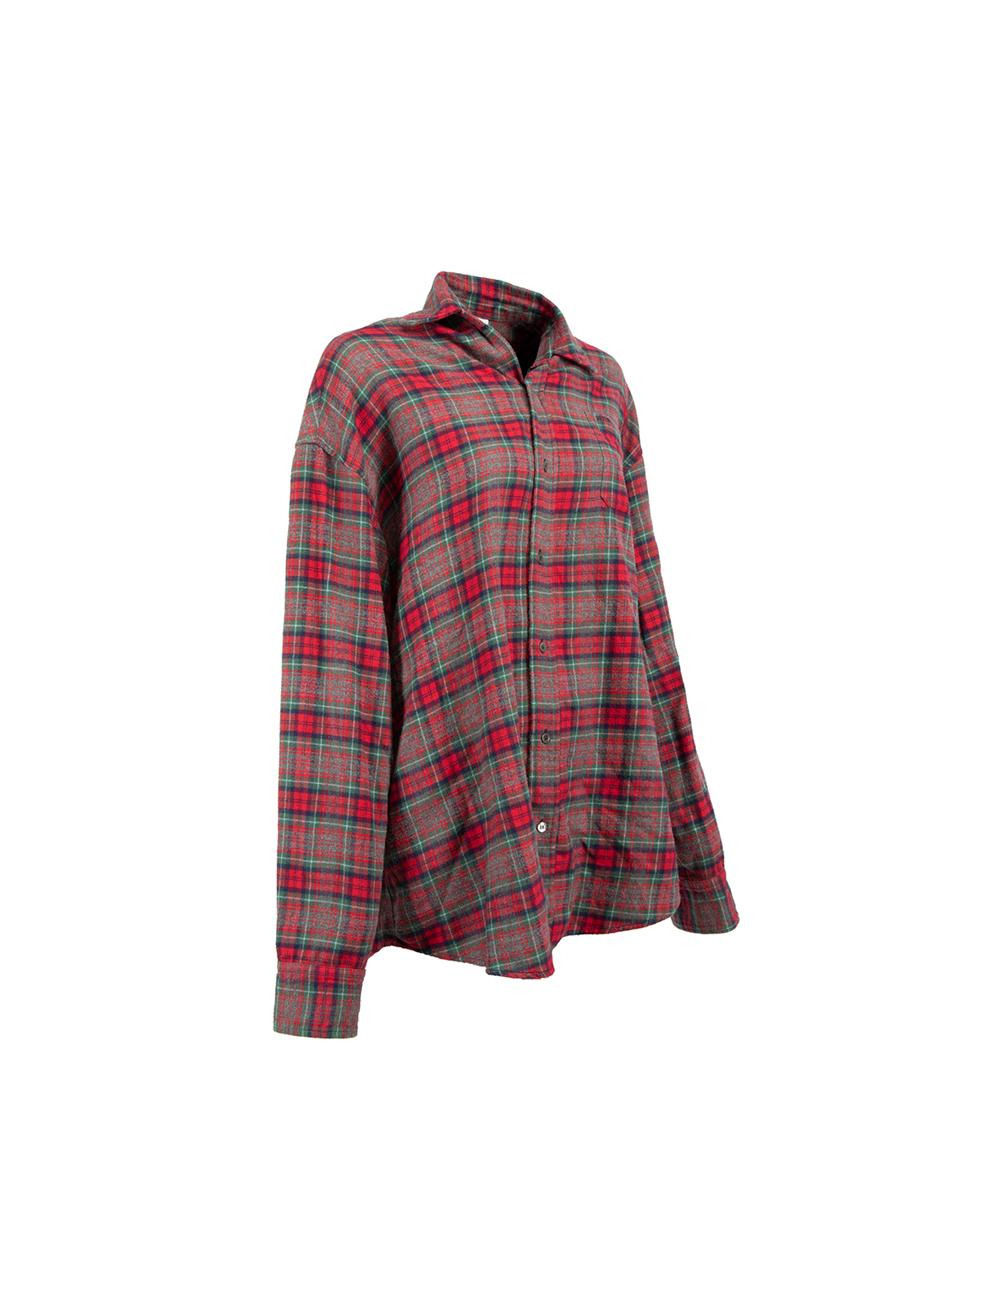 CONDITION is Very good. Hardly any visible wear to shirt is evident on this used Vetements designer resale item.



Details


Red and multicoloured tartan

Cotton

Long sleeved shirt

Oversized fit

Button-up fastening

2x Buttons on each